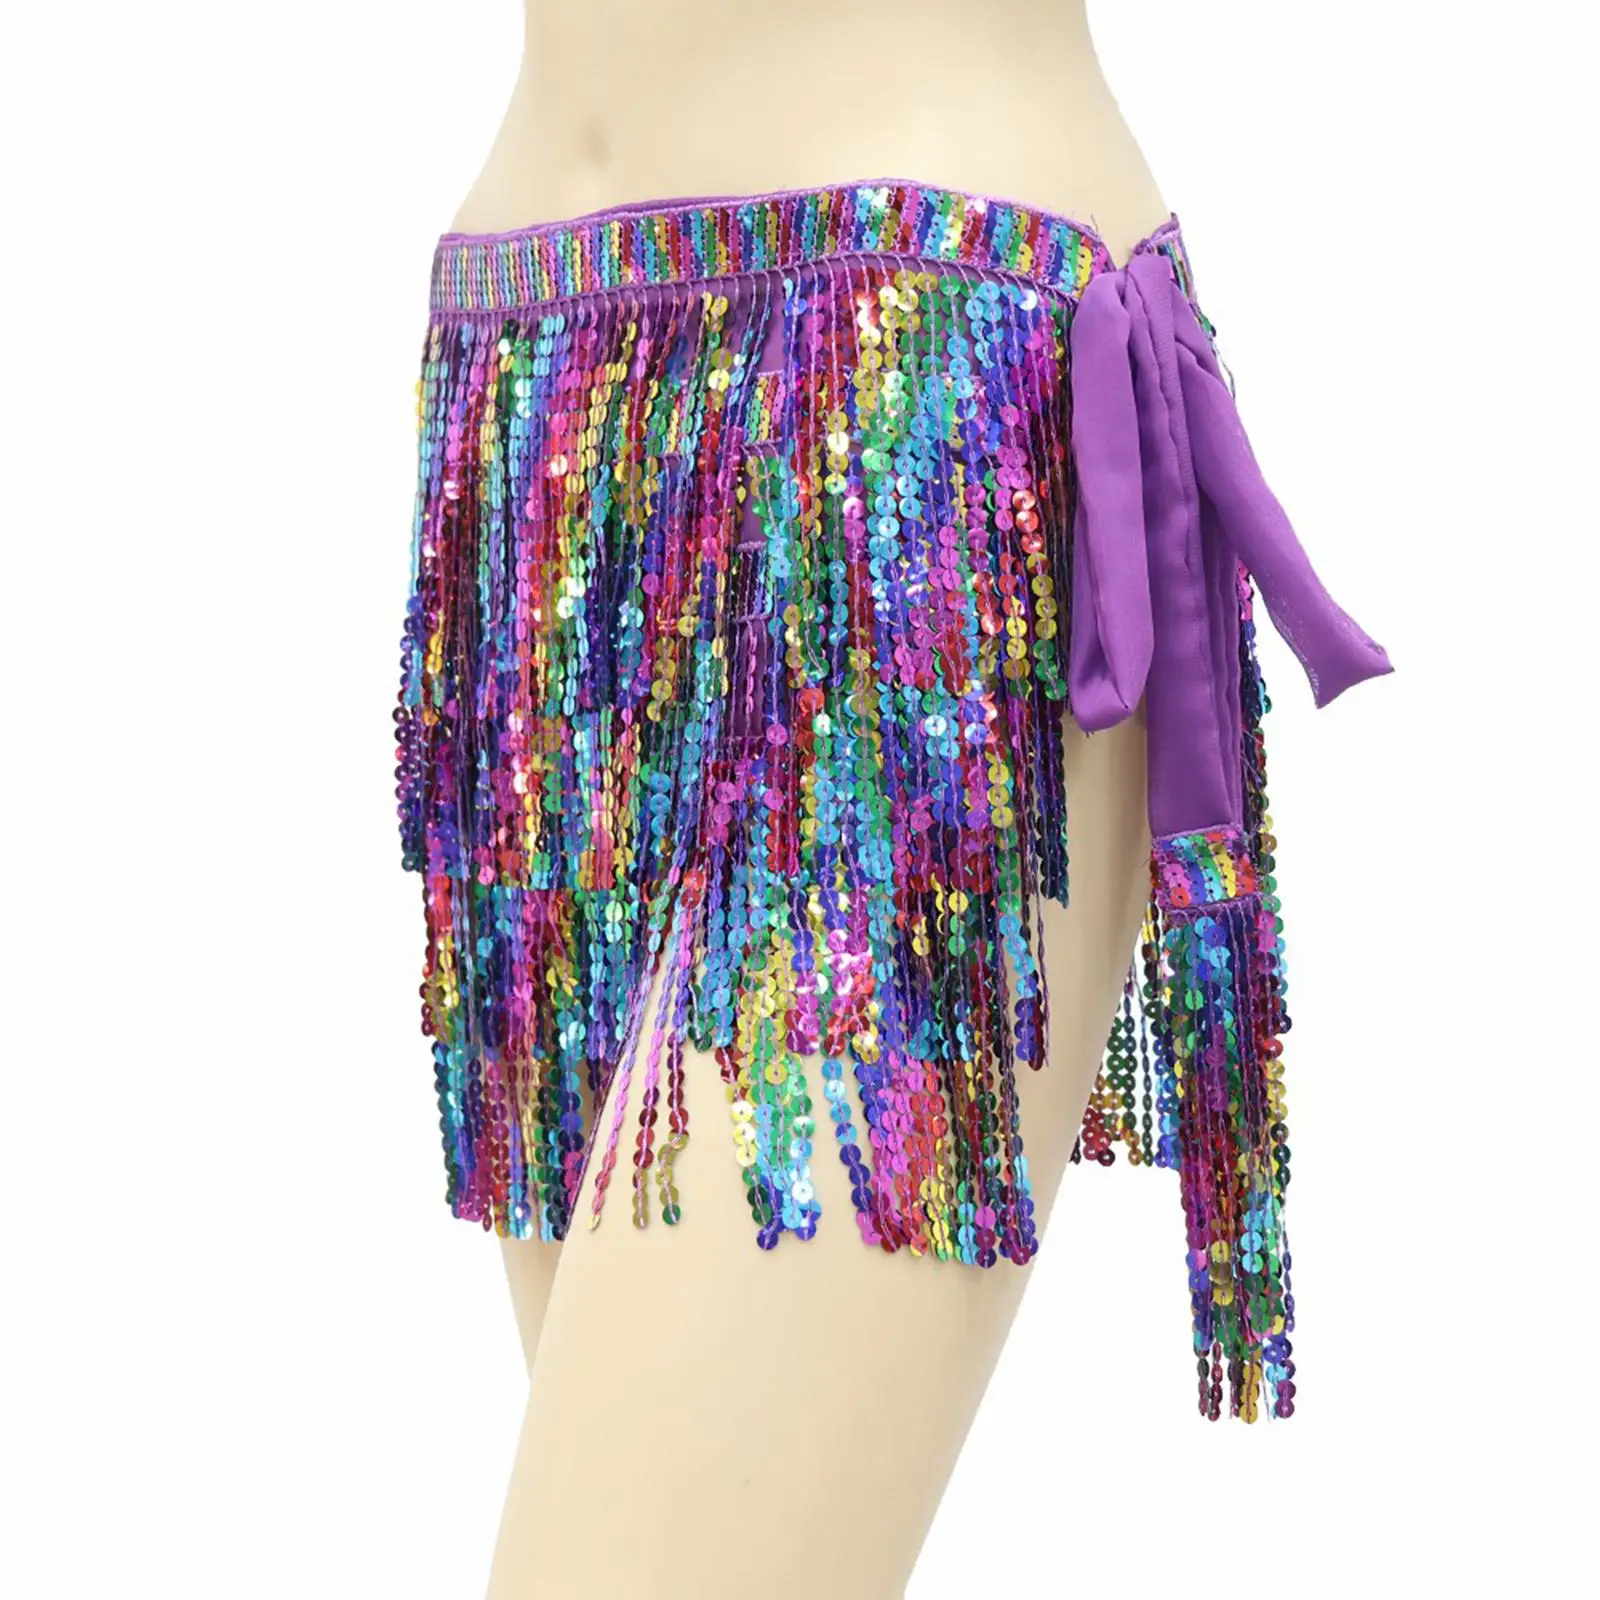 

72.83inch Sequin Dance Skirt Outfit Sparkly Fashion Performance Wrap Skirts Shining Belly Dance Hip Scarf for Cosplay Festivals